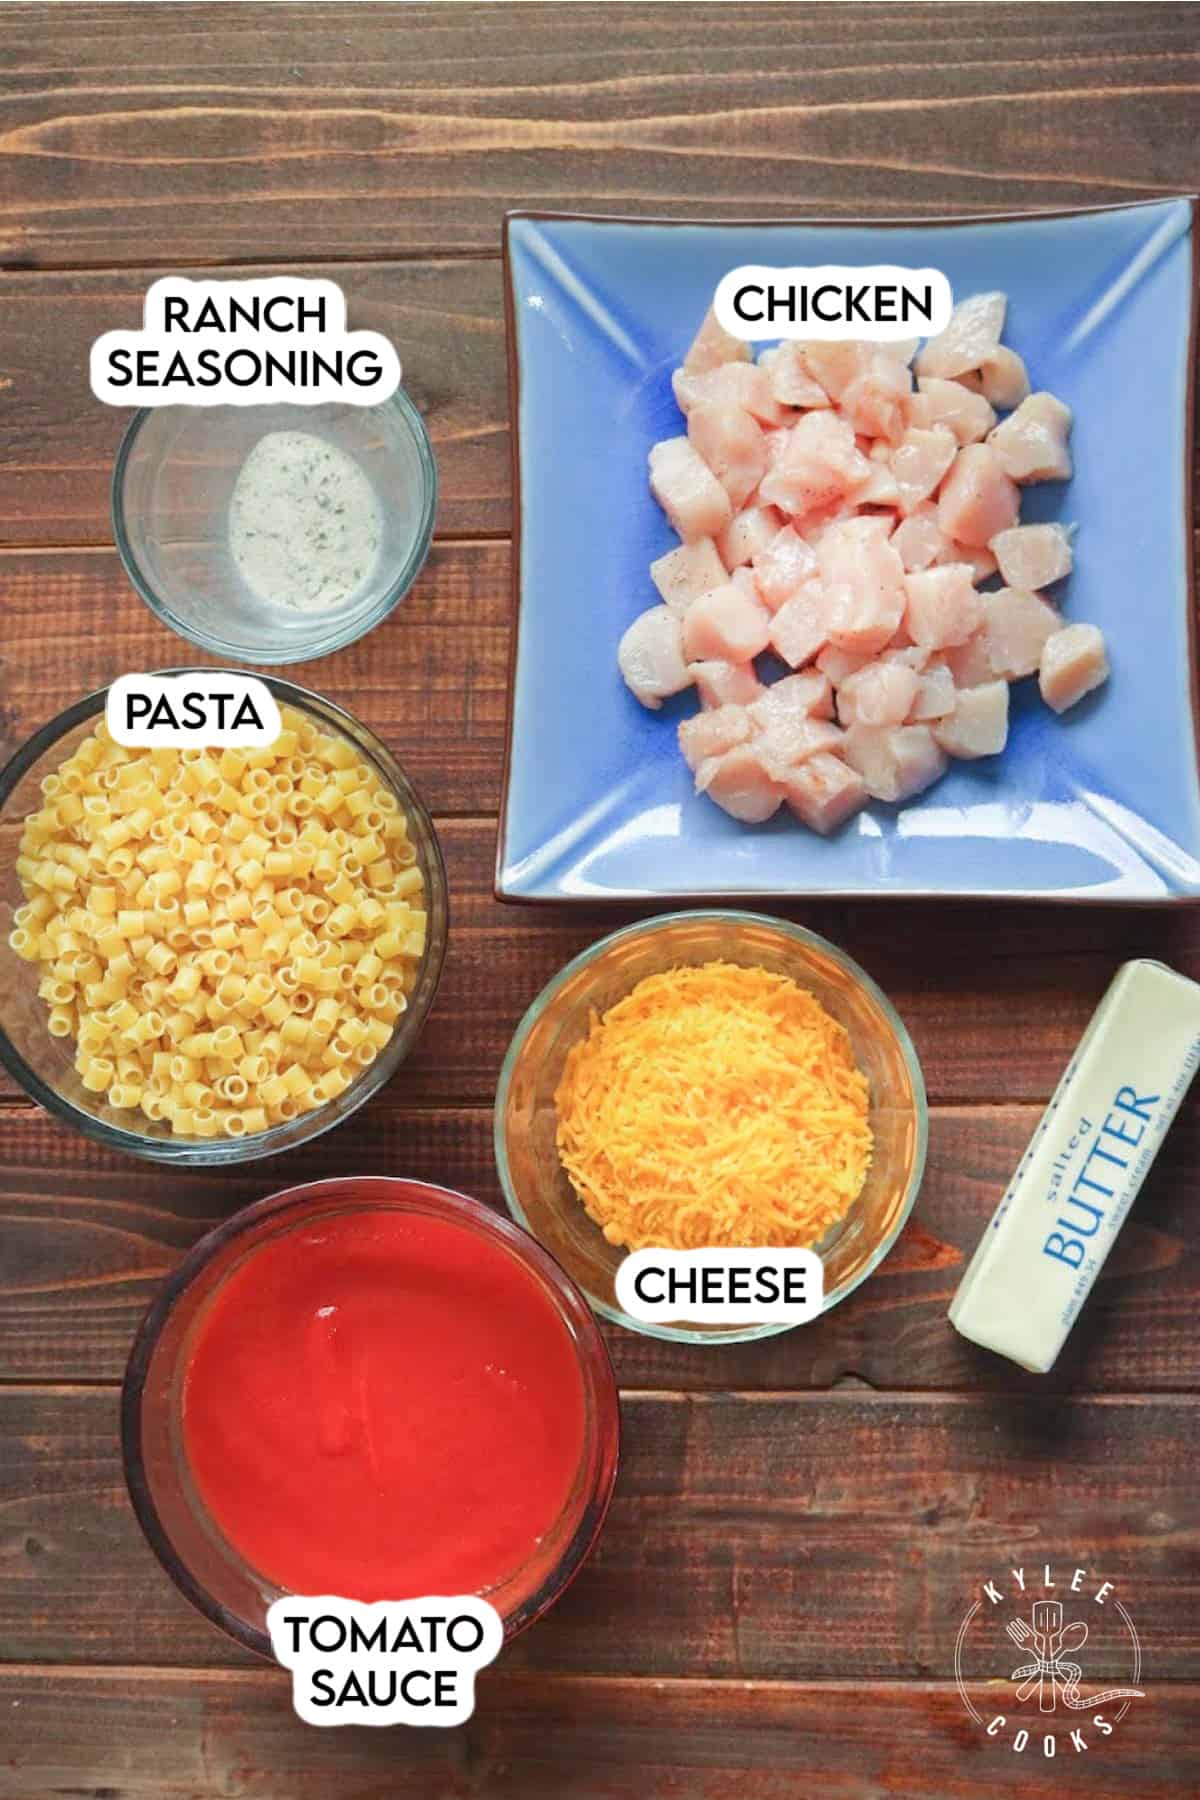 Ingredients to make chicken tomato pasta laid out and labeled.